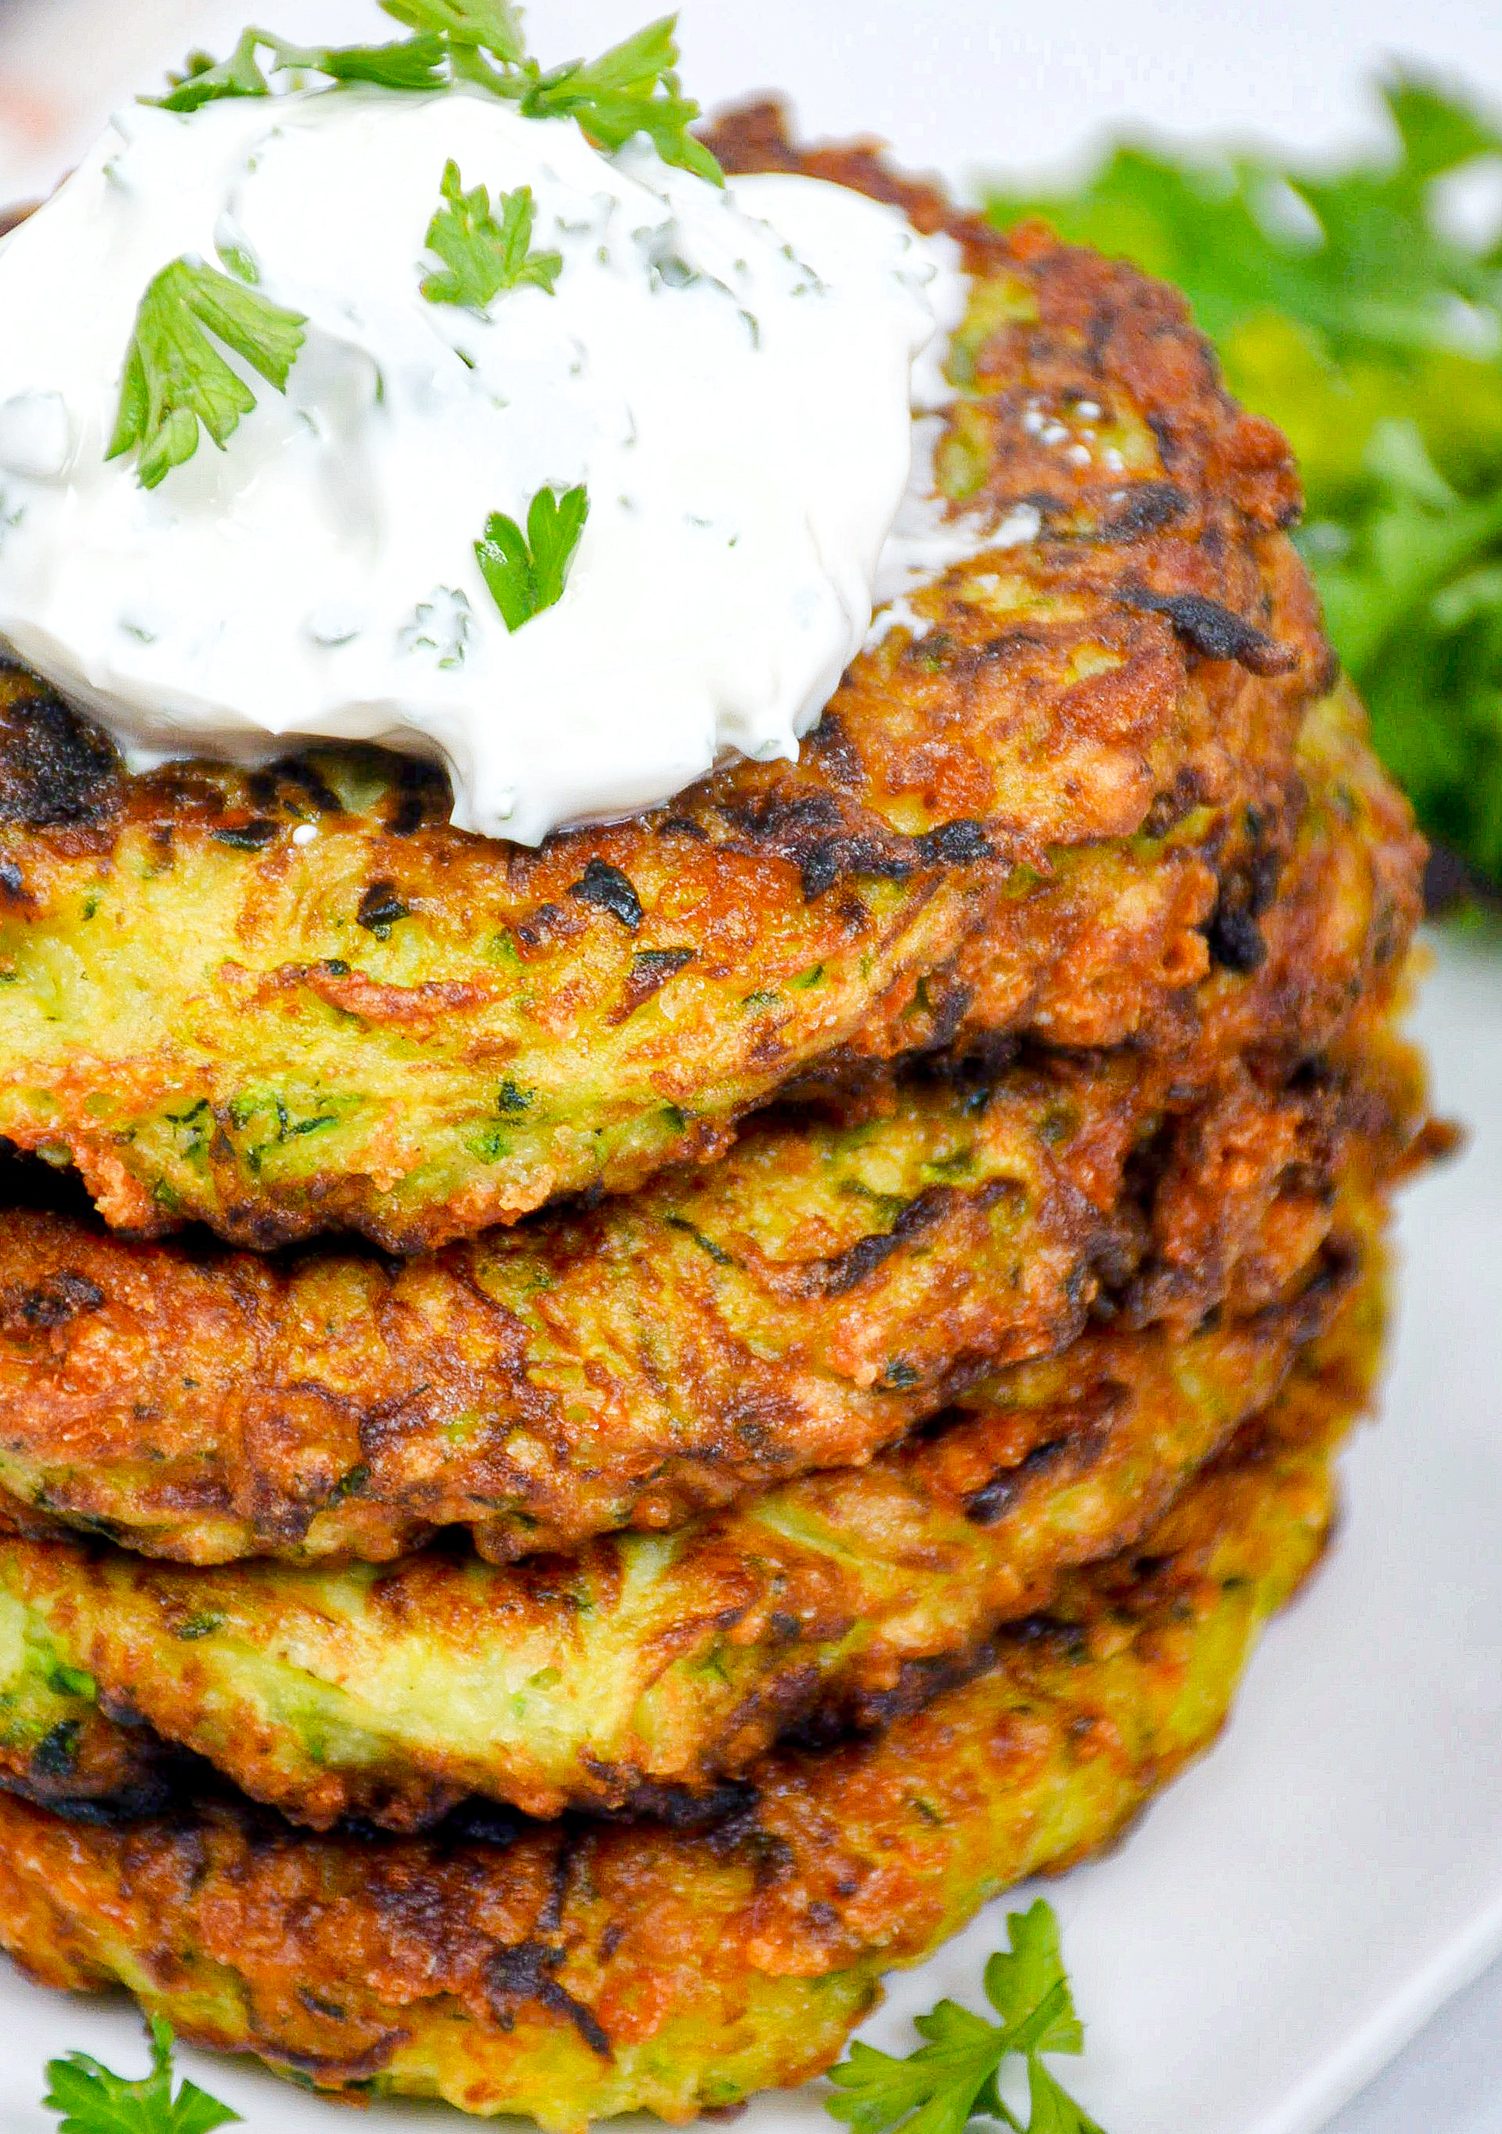 cheese fritters, parmesan zucchini fritters, zucchini parmesan fritters